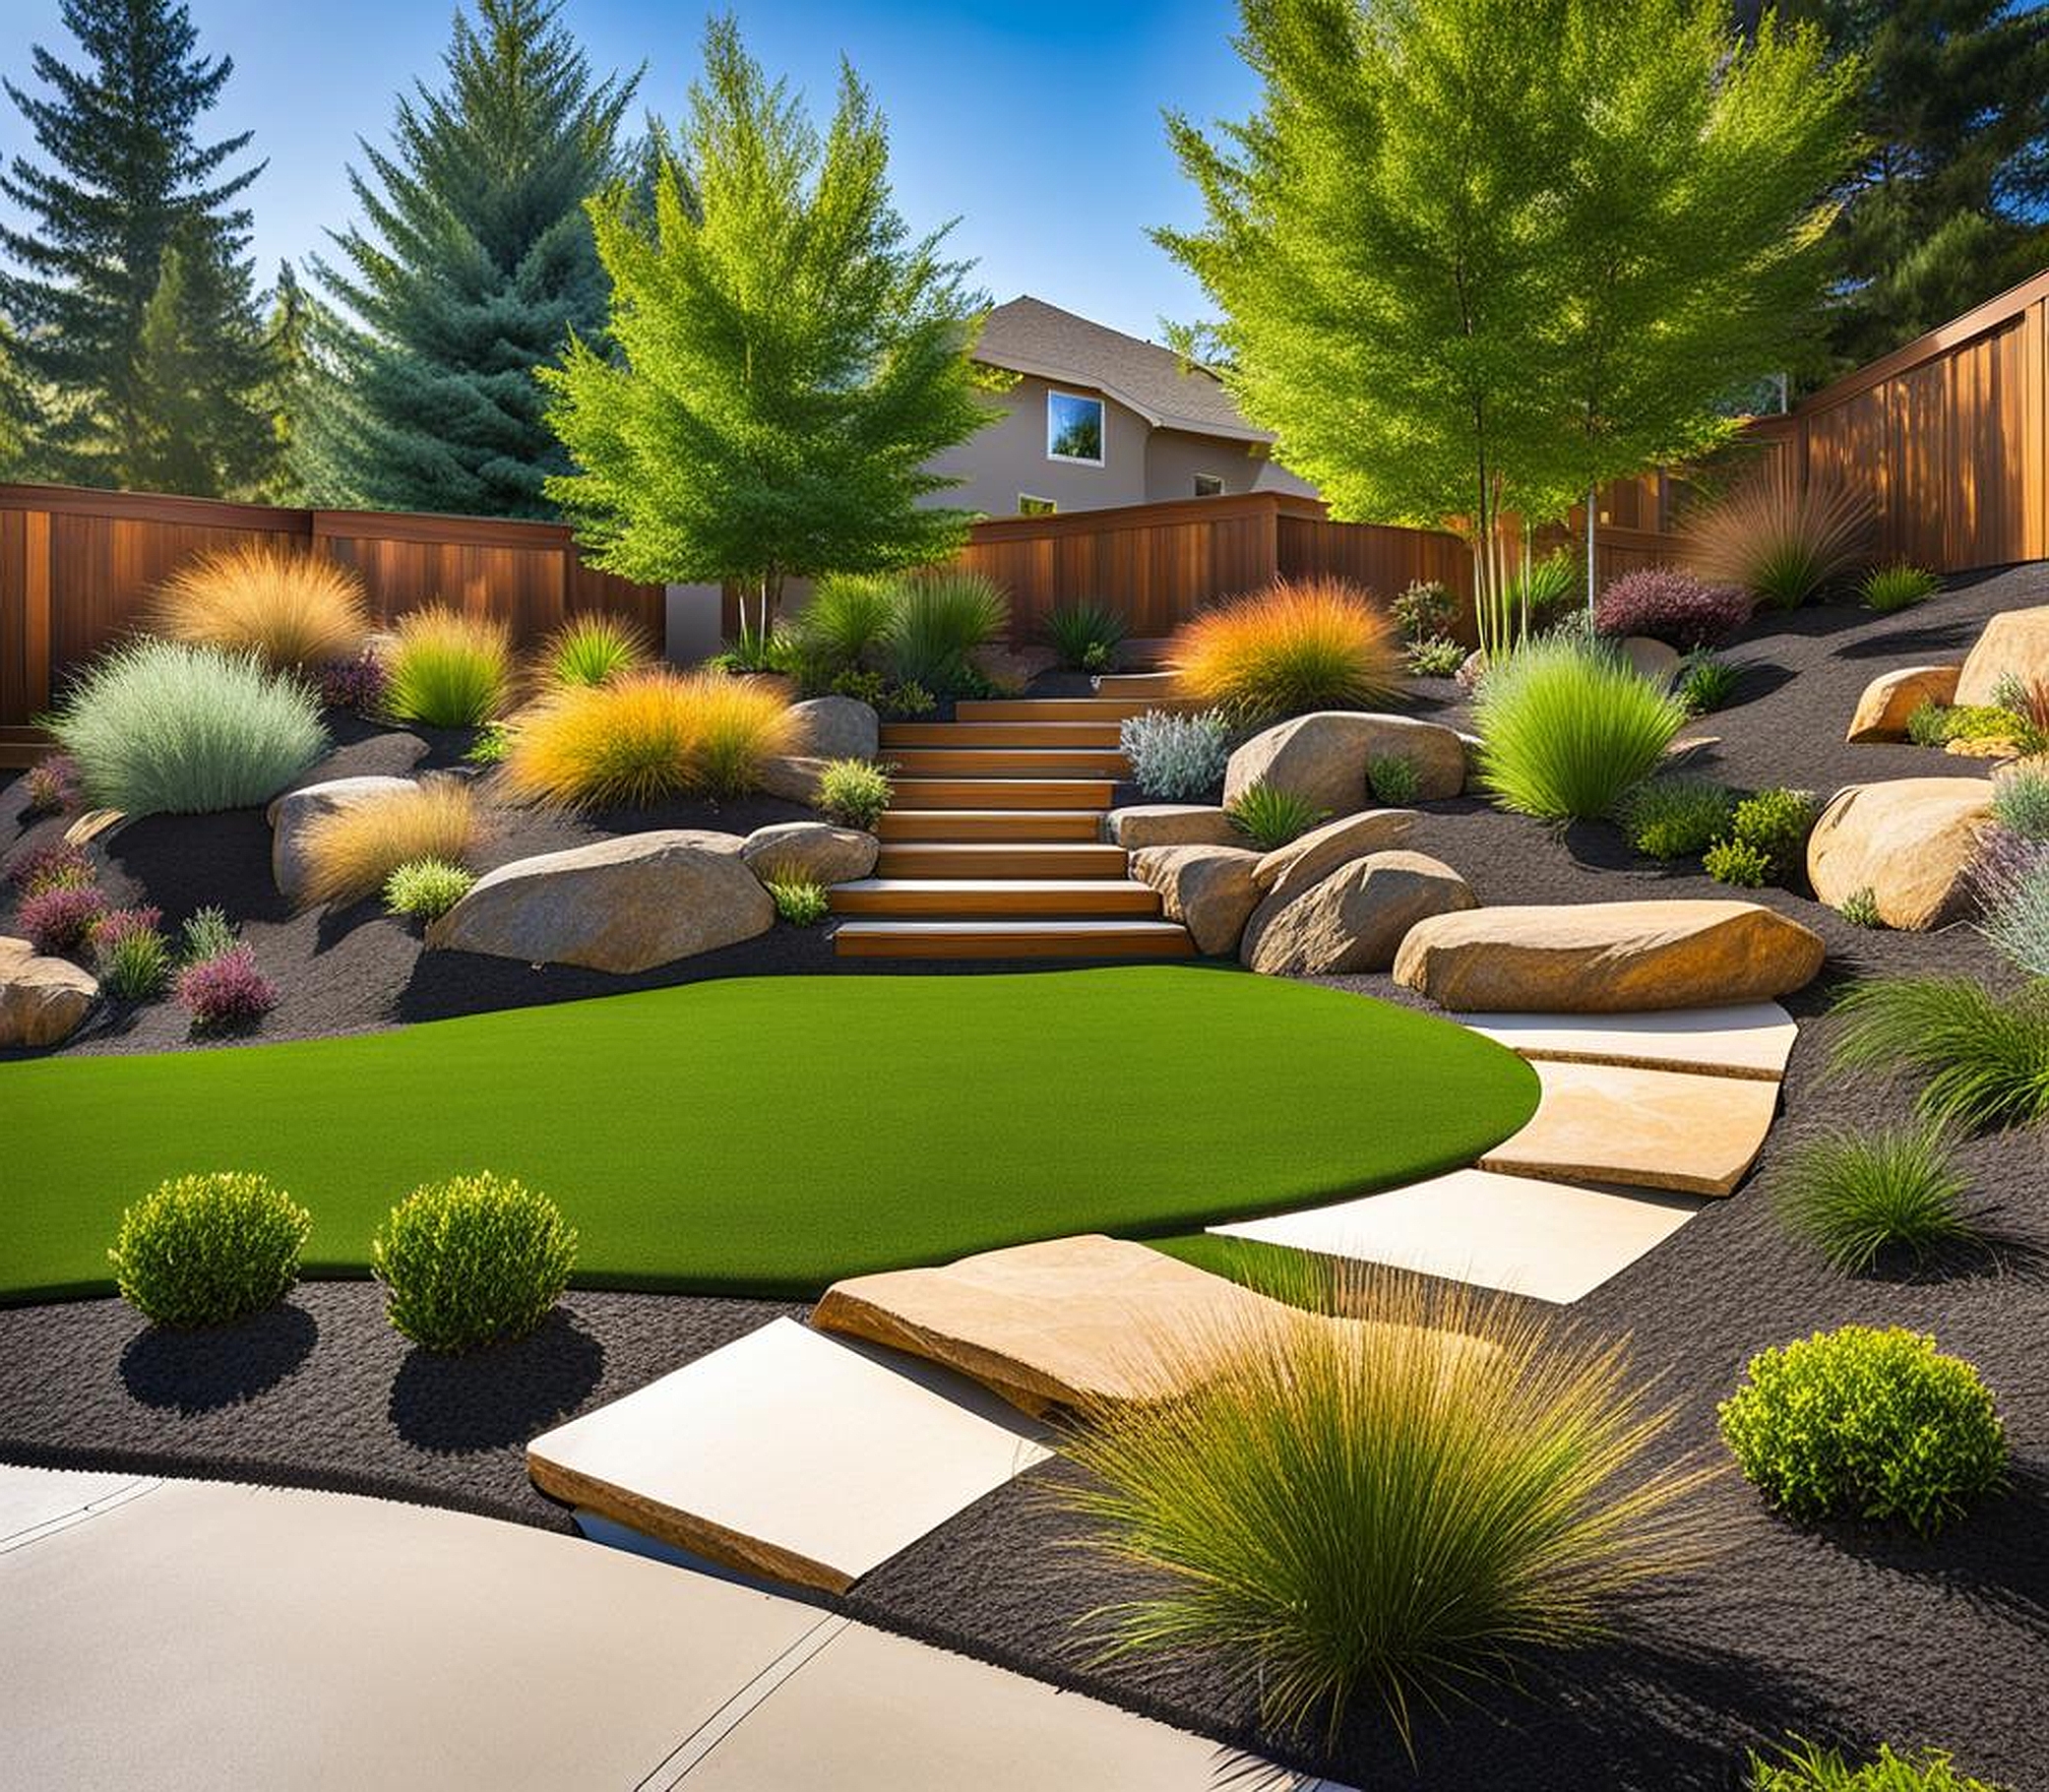 Unique Landscaping Ideas for Sloped Backyards with a Mountain View